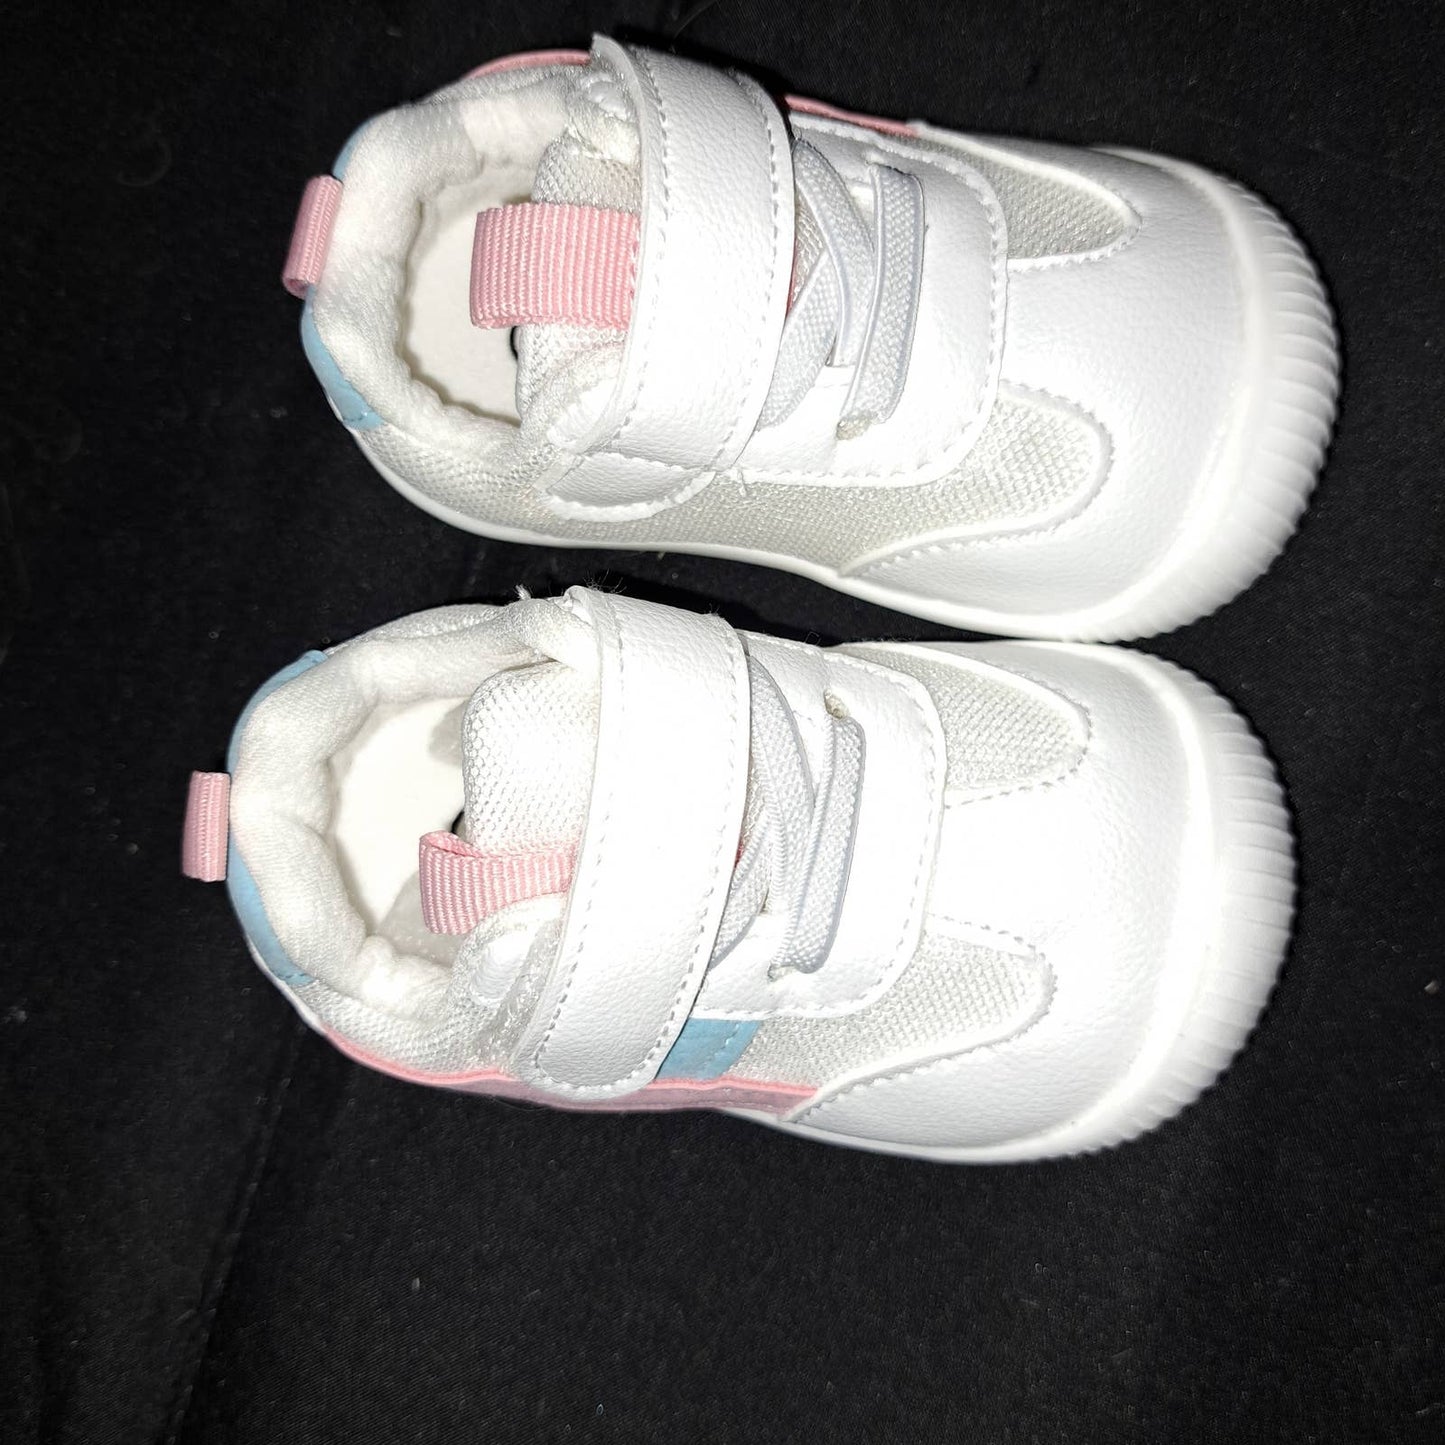 MK MATT KEELY Baby Shoes First Walking Shoes Girls Boys Breathable 15 UK